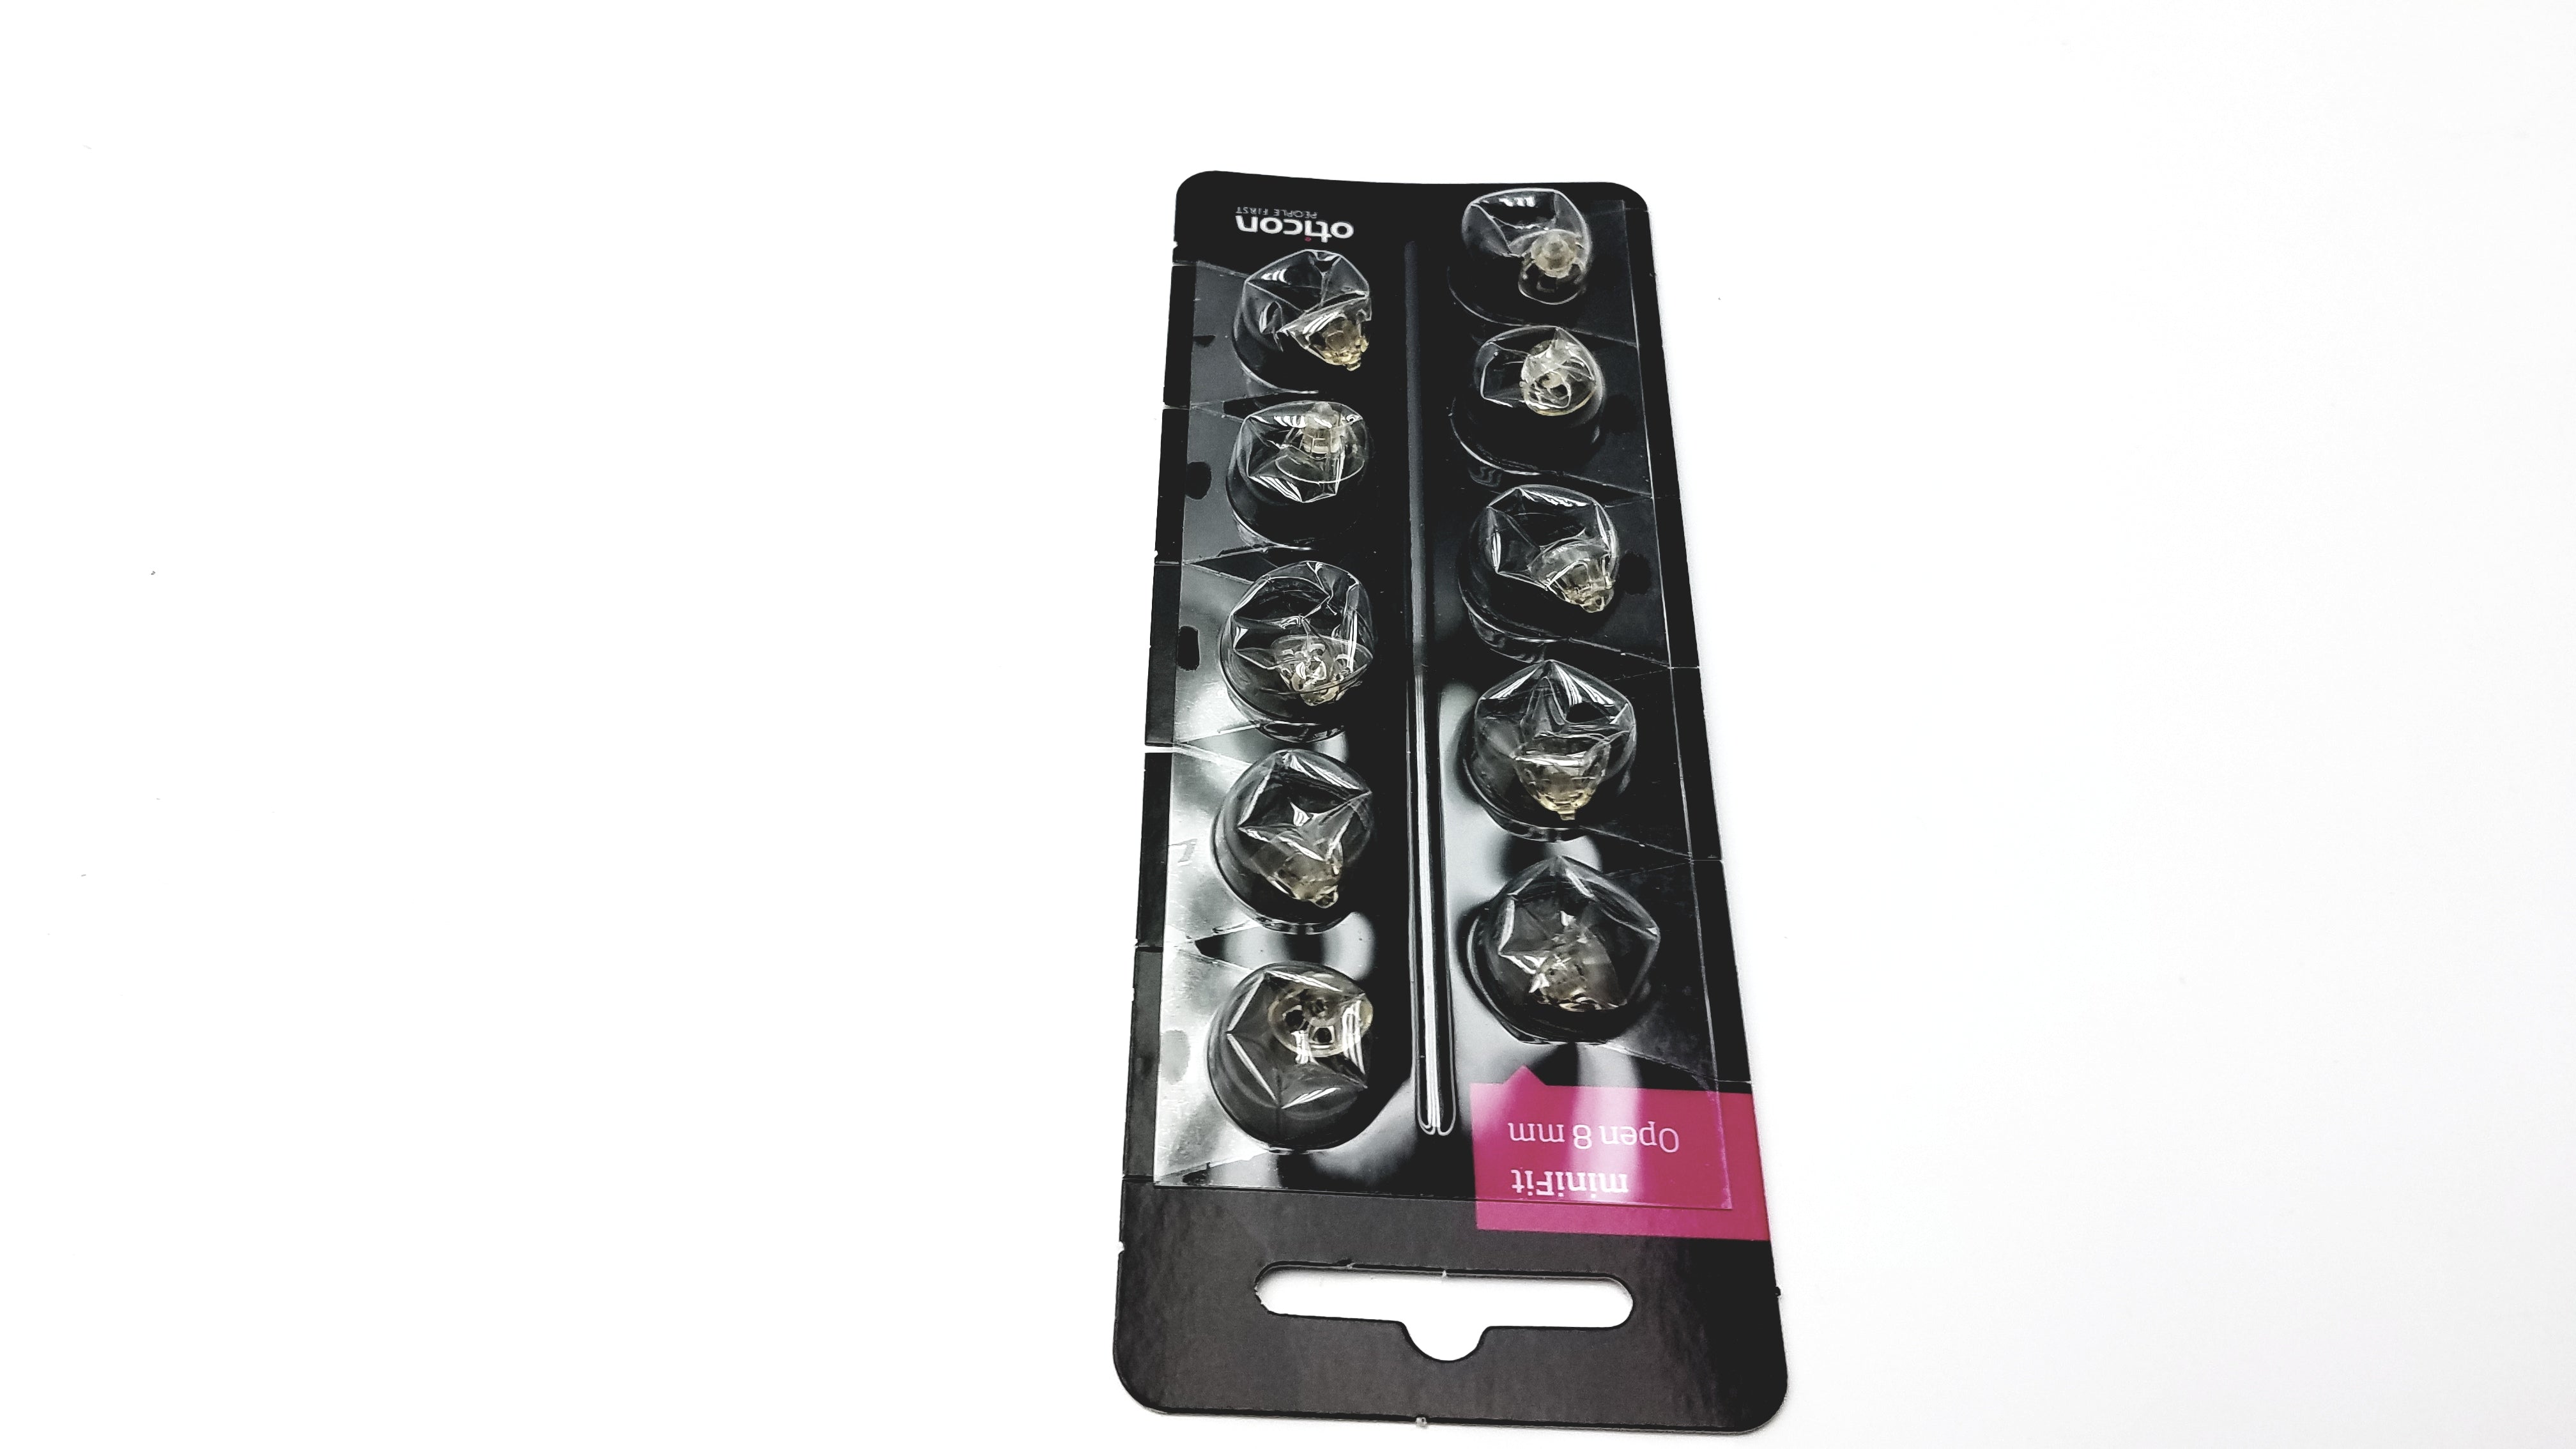 Load image into Gallery viewer, 1 Pack miniFit 8mm Open Domes For Oticon Hearing Aids. 10 Domes